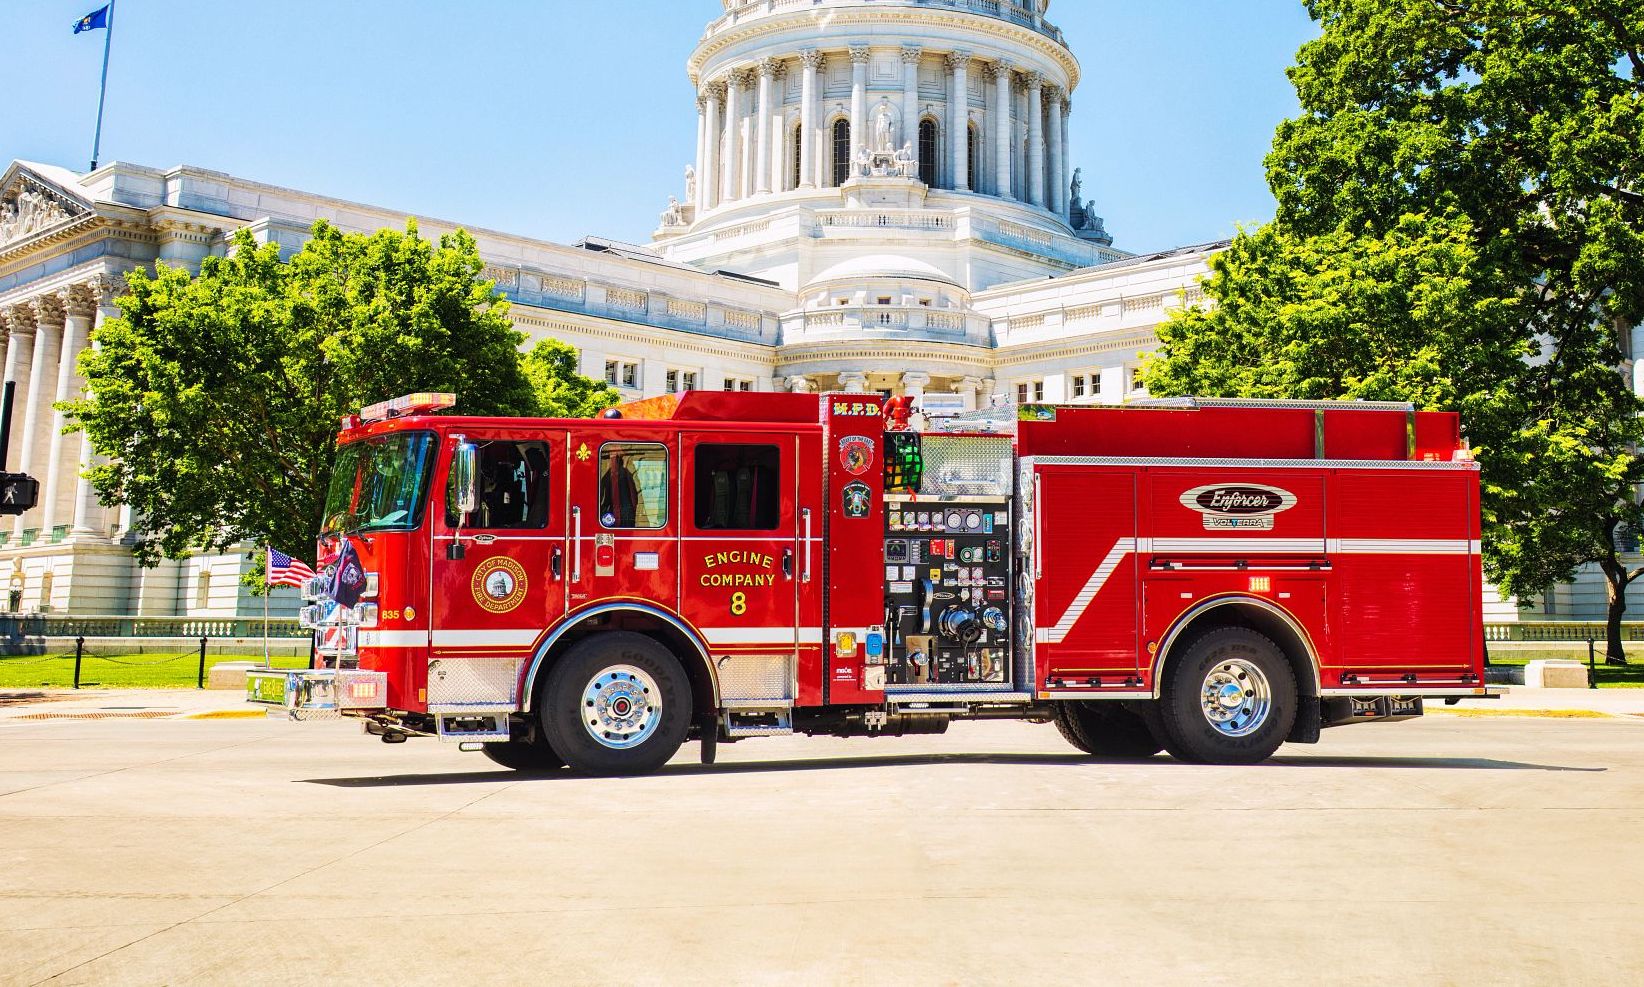 Portland to get first electric fire truck in Pacific Northwest - OPB